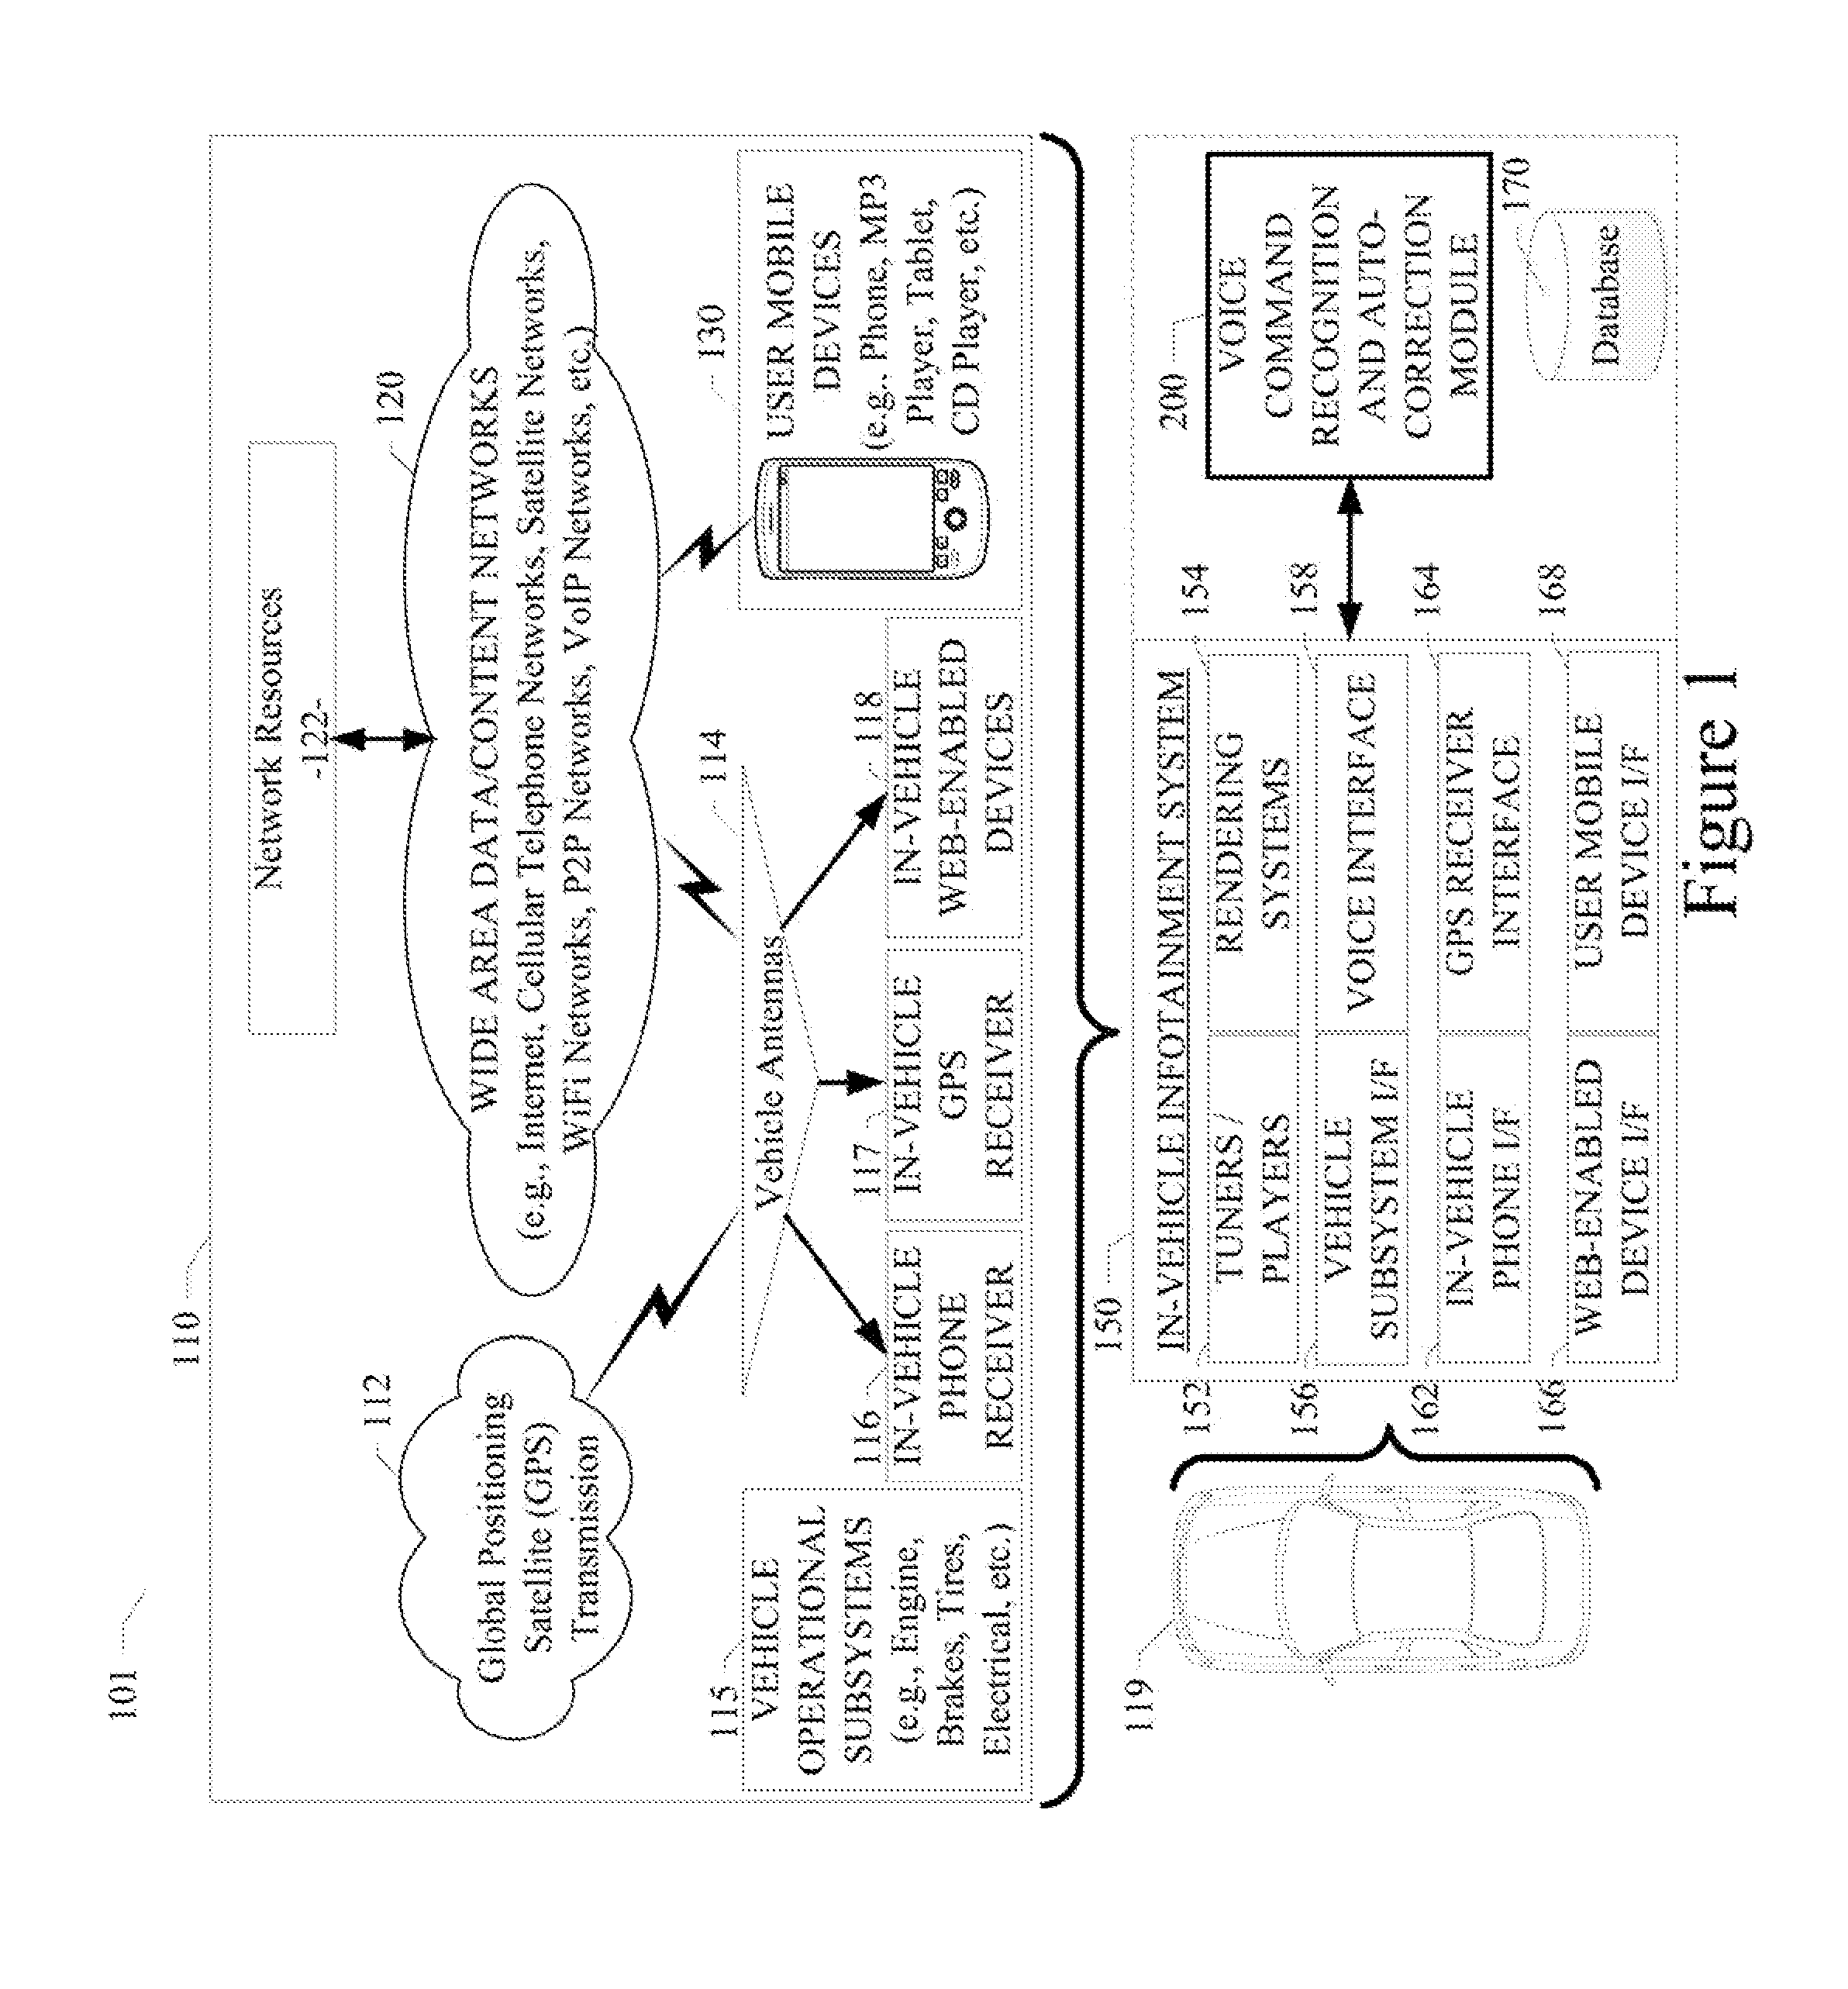 System and method for recognition and automatic correction of voice commands